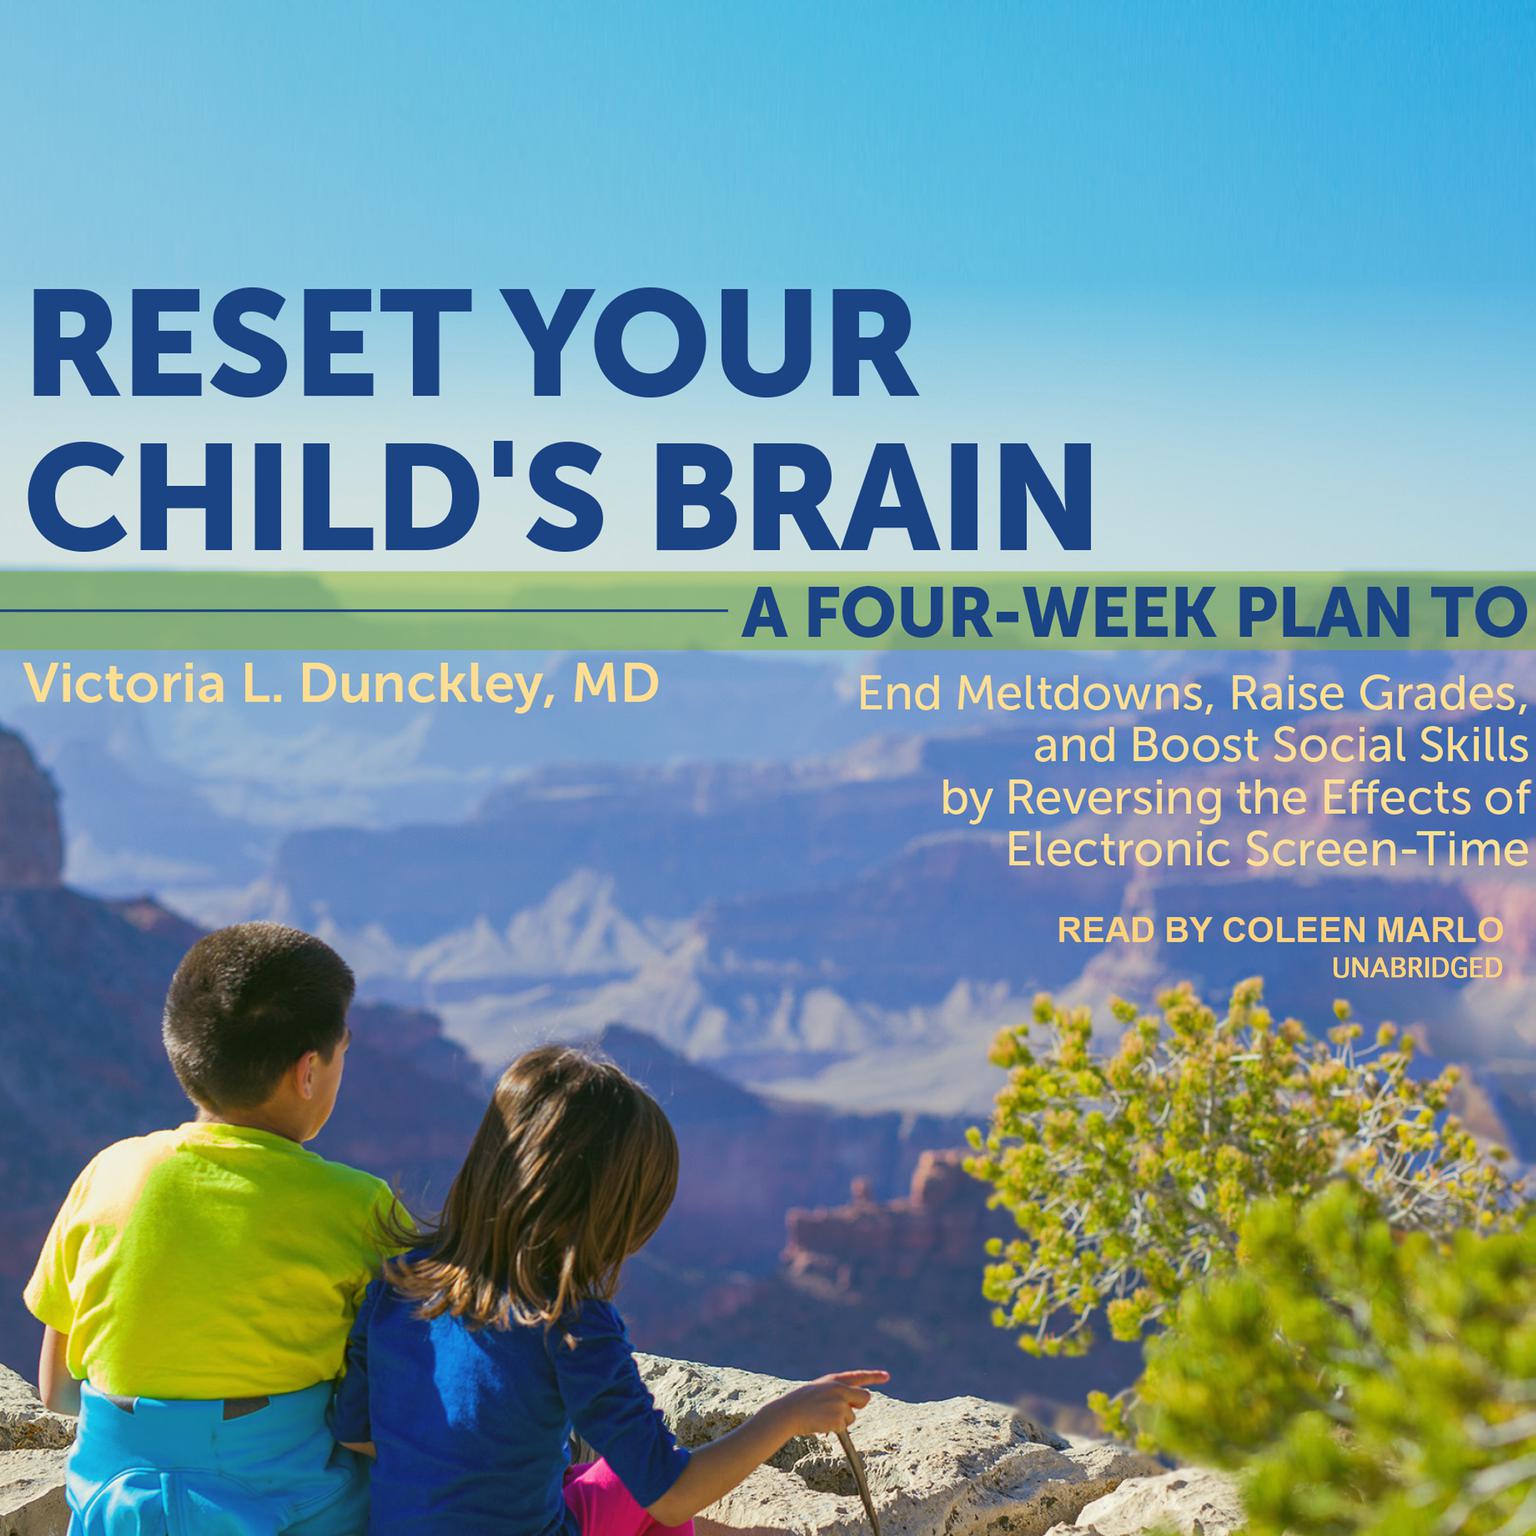 Reset Your Childs Brain: A Four-Week Plan to End Meltdowns, Raise Grades, and Boost Social Skills by Reversing the Effects of Electronic Screen-Time Audiobook, by Victoria L. Dunckley